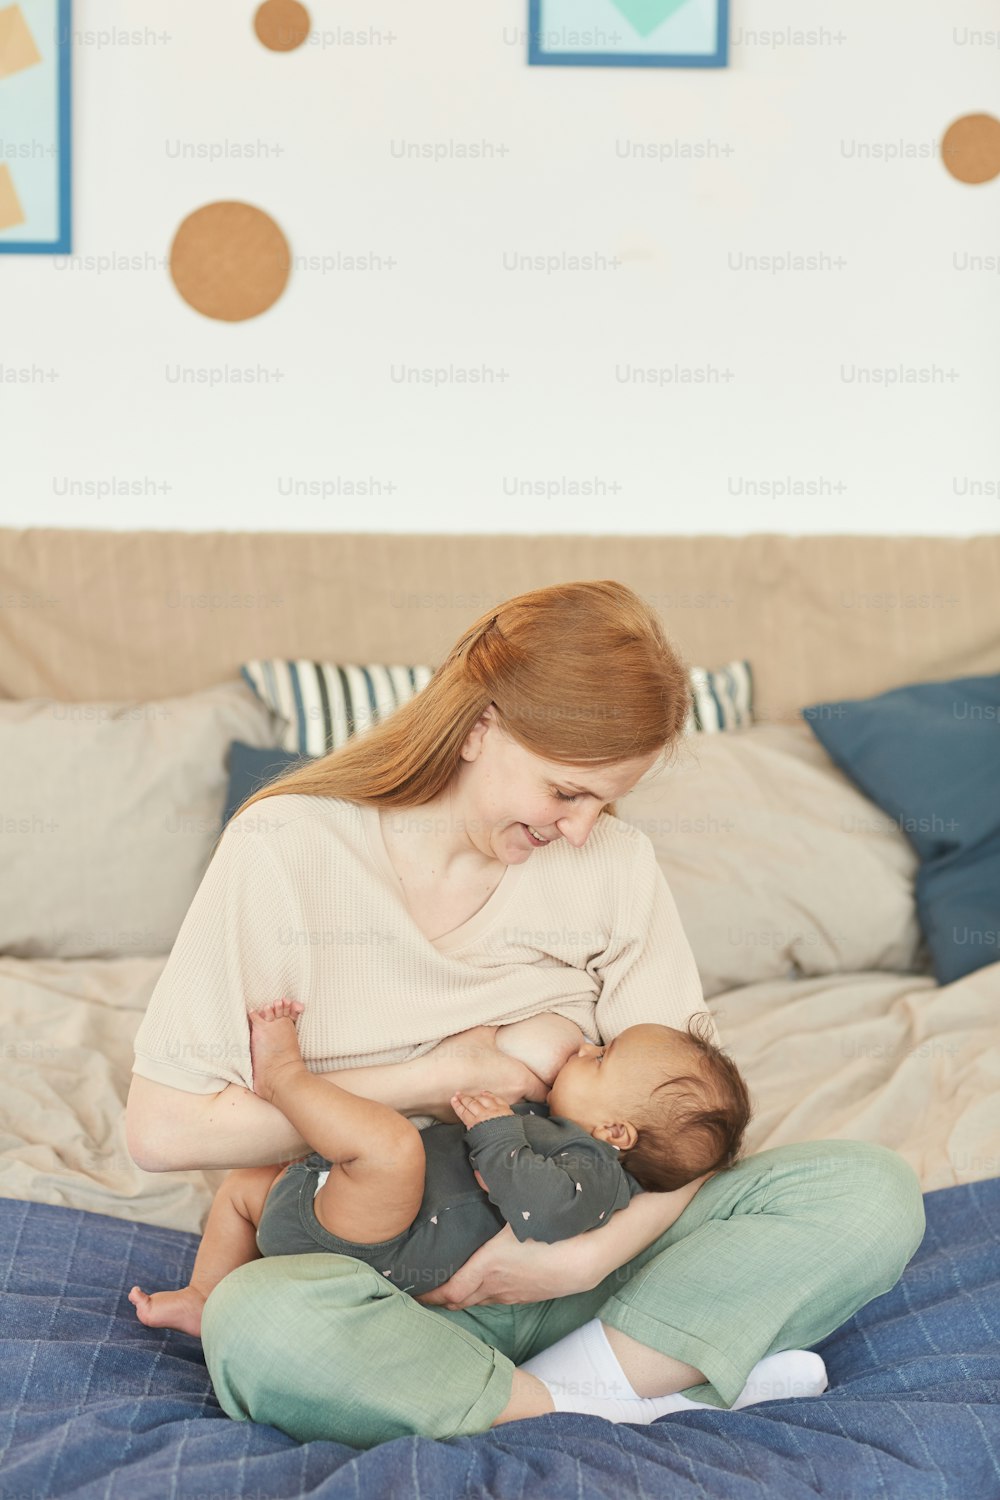 Vertical full length portrait of smiling adult mother breastfeeding mixed-race baby while sitting on bed at home, copy space